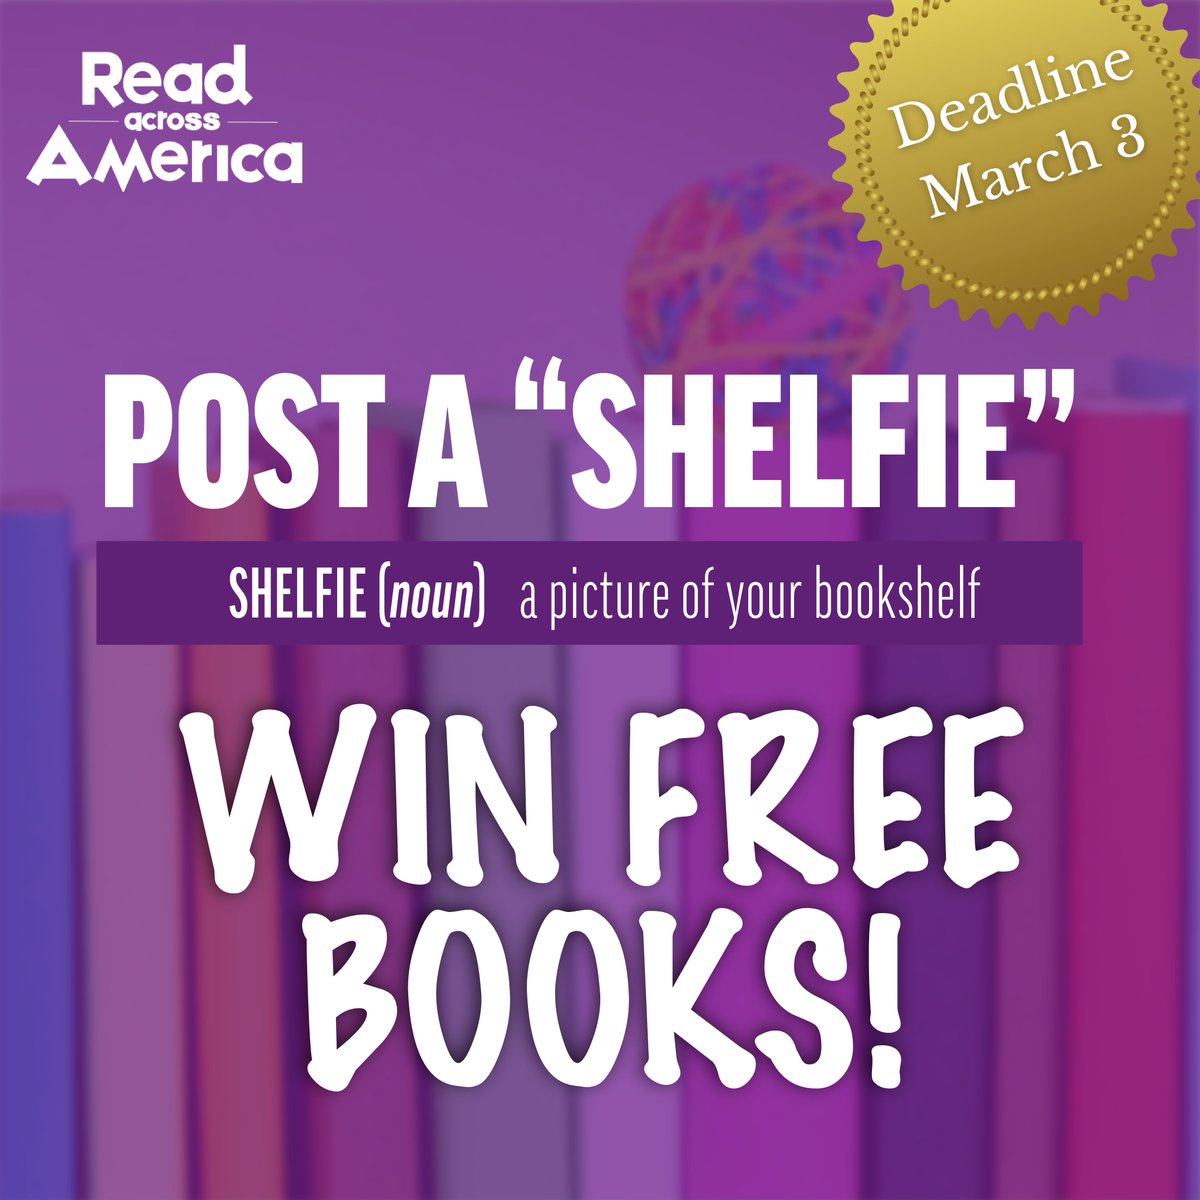 We’re giving away 📚 FREE BOOKS 📚 for #ReadAcrossAmerica Day. #1: Take a photo of your bookcase featuring diverse books. #2: Load that 'shelfie” on Twitter or Instagram. #3: Tag @NEAToday + #shelfie. Deadline March 3—Multiple entries are allowed per person, so post away!